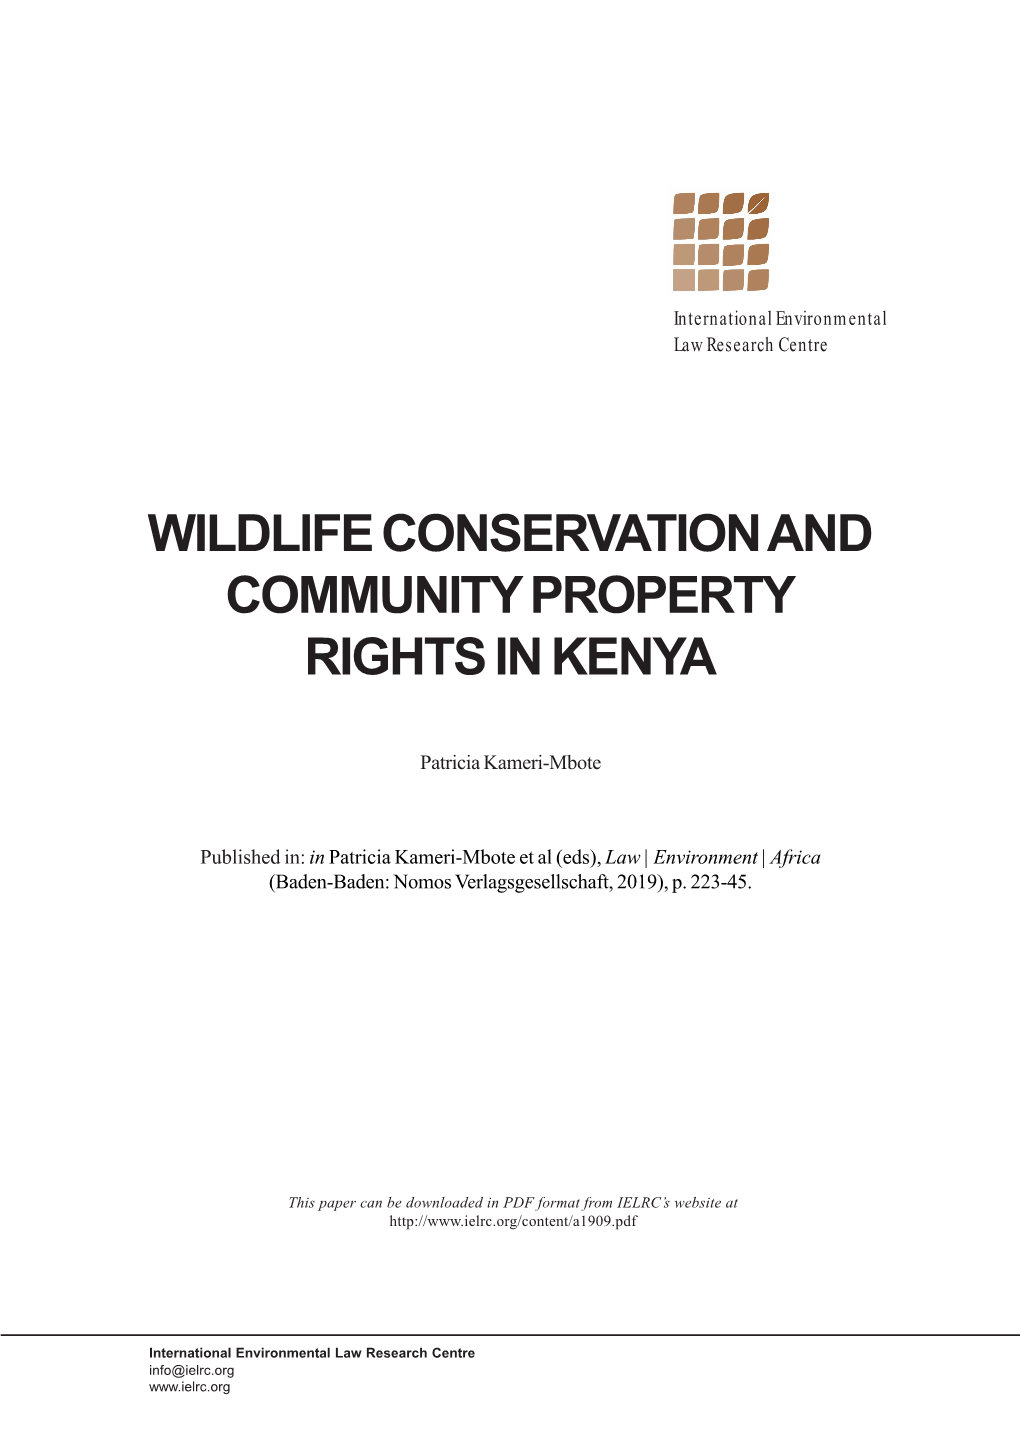 Wildlife Conservation and Community Property Rights in Kenya